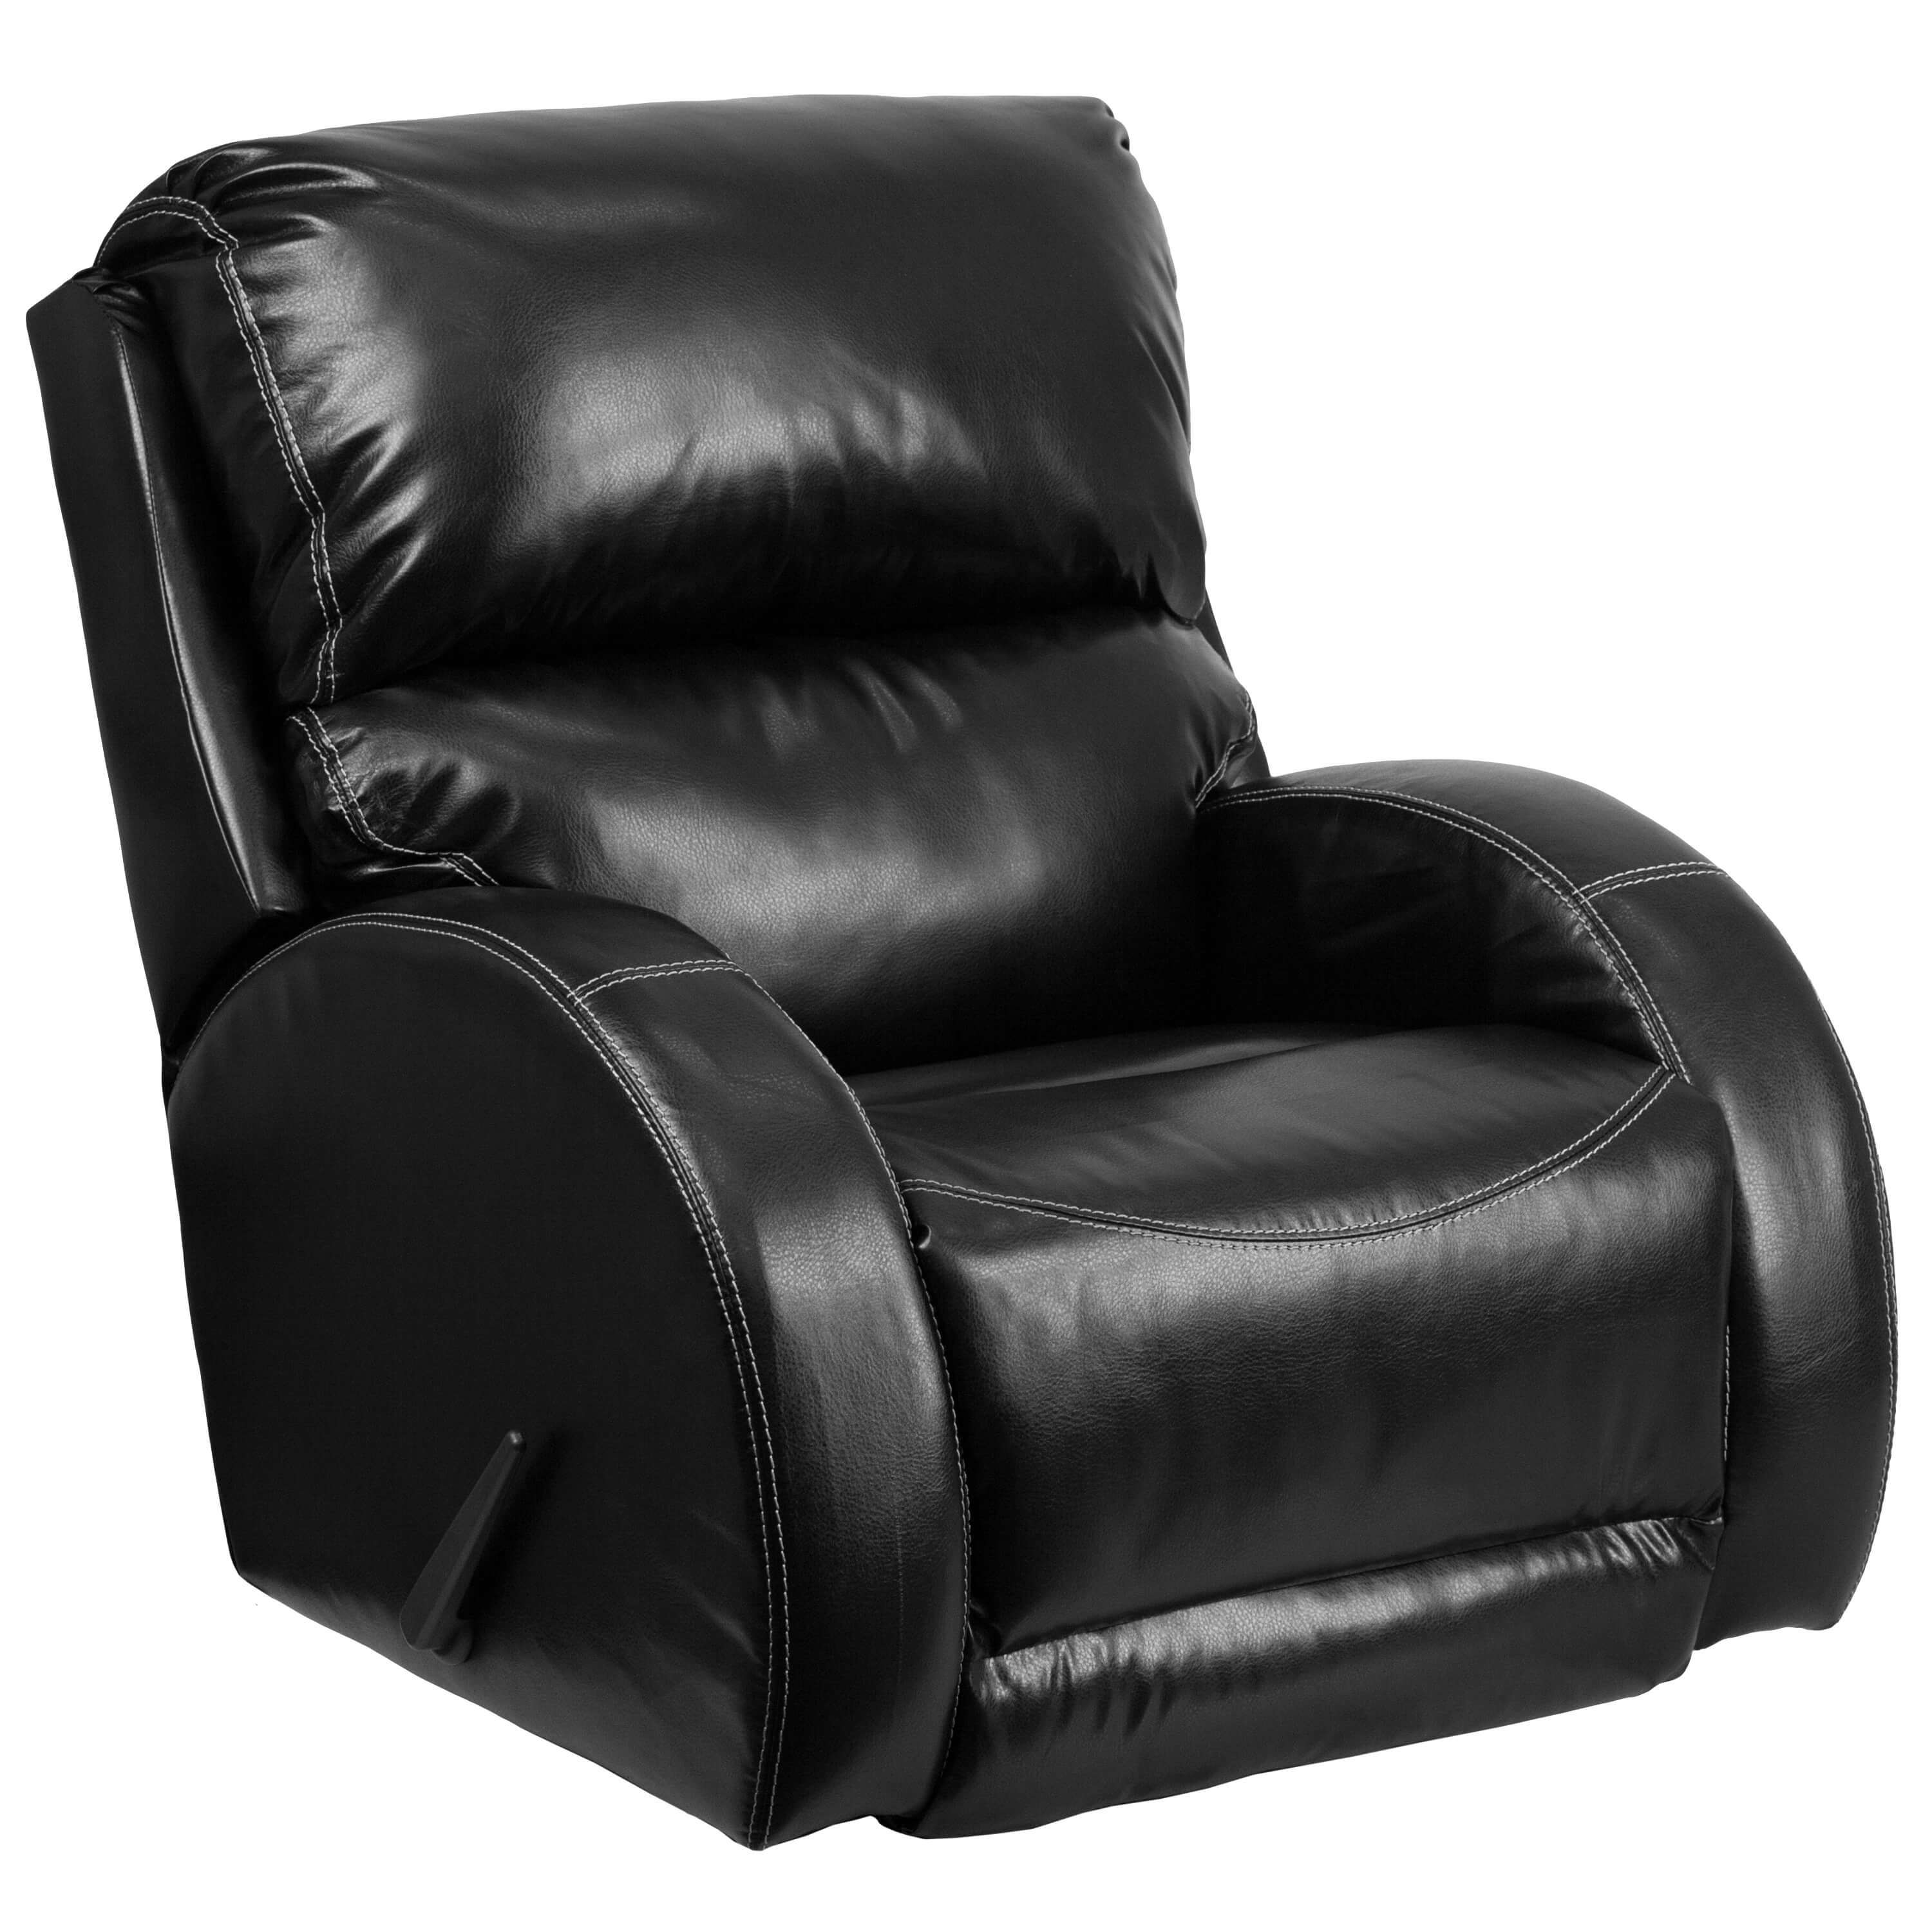 contemporary-recliners-leather-rocking-recliner.jpg